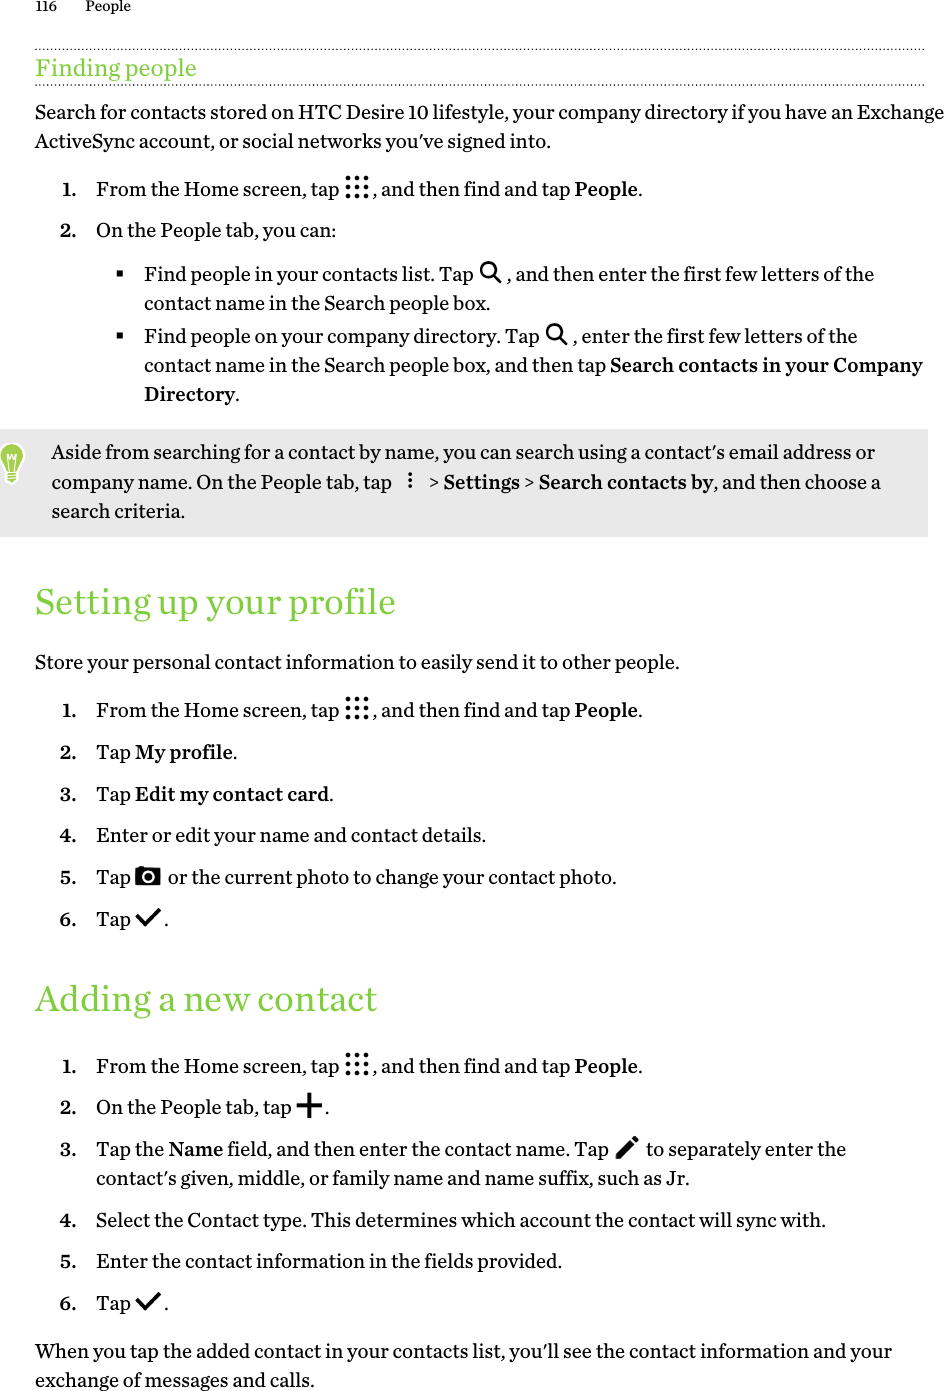 Finding peopleSearch for contacts stored on HTC Desire 10 lifestyle, your company directory if you have an Exchange ActiveSync account, or social networks you&apos;ve signed into. 1. From the Home screen, tap  , and then find and tap People.2. On the People tab, you can:§Find people in your contacts list. Tap  , and then enter the first few letters of the contact name in the Search people box.§Find people on your company directory. Tap  , enter the first few letters of the contact name in the Search people box, and then tap Search contacts in your Company Directory.Aside from searching for a contact by name, you can search using a contact&apos;s email address or company name. On the People tab, tap   &gt; Settings &gt; Search contacts by, and then choose a search criteria.Setting up your profileStore your personal contact information to easily send it to other people. 1. From the Home screen, tap  , and then find and tap People.2. Tap My profile.3. Tap Edit my contact card.4. Enter or edit your name and contact details.5. Tap   or the current photo to change your contact photo.6. Tap  .Adding a new contact1. From the Home screen, tap  , and then find and tap People.2. On the People tab, tap  .3. Tap the Name field, and then enter the contact name. Tap   to separately enter the contact&apos;s given, middle, or family name and name suffix, such as Jr. 4. Select the Contact type. This determines which account the contact will sync with.5. Enter the contact information in the fields provided.6. Tap  .When you tap the added contact in your contacts list, you&apos;ll see the contact information and your exchange of messages and calls.116 People